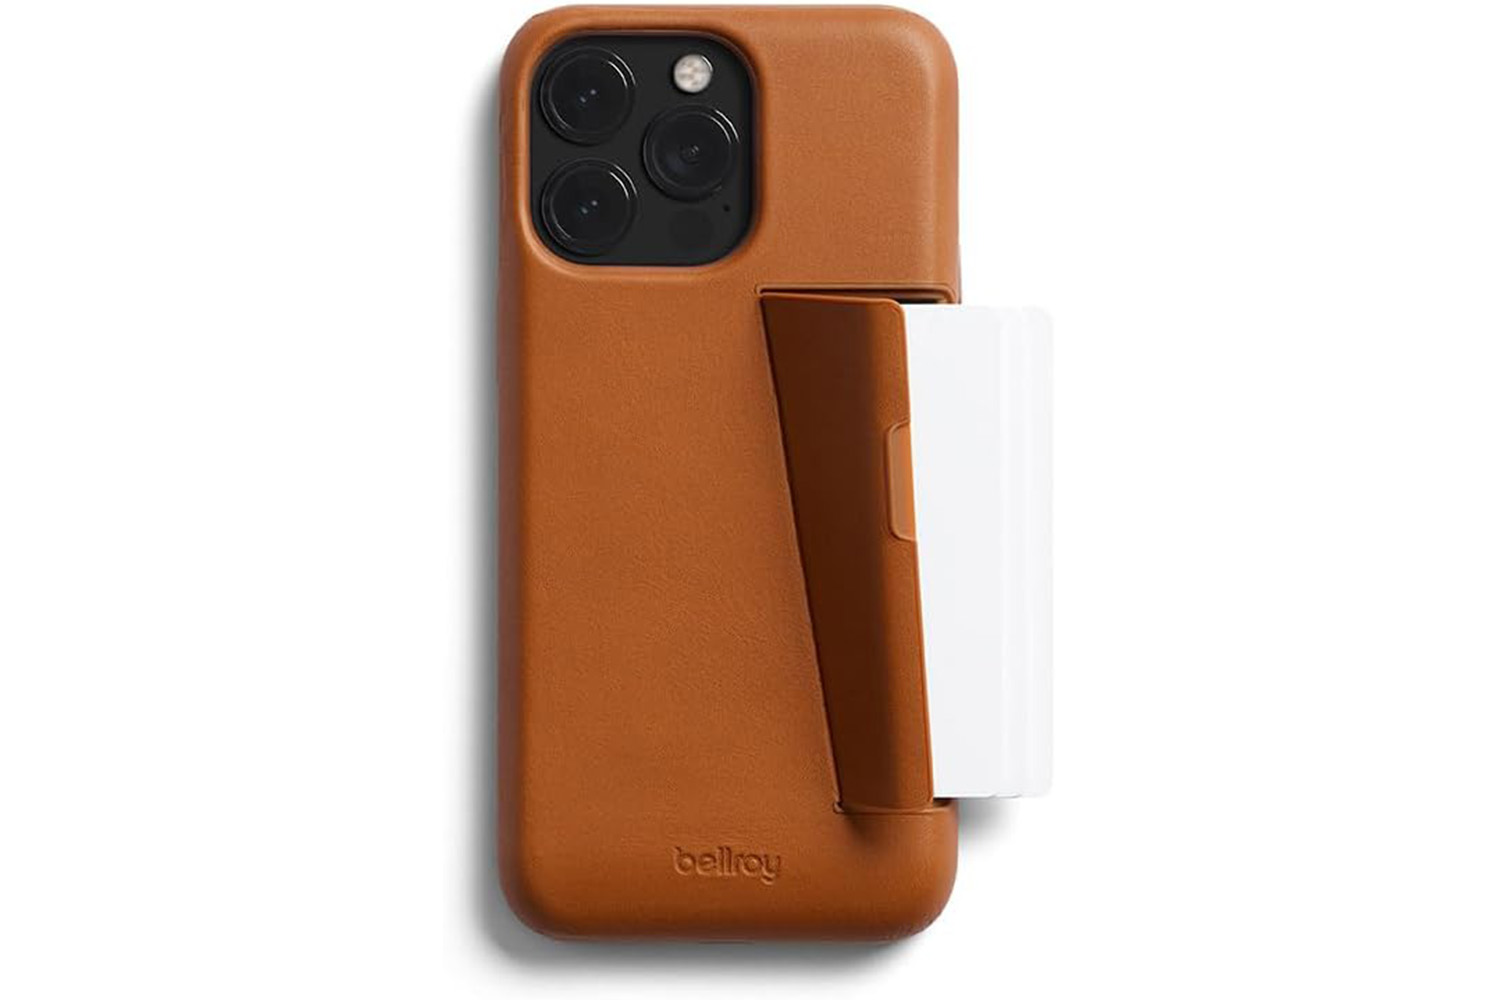  Jancyu Compatible with iPhone 15 Pro Max Case